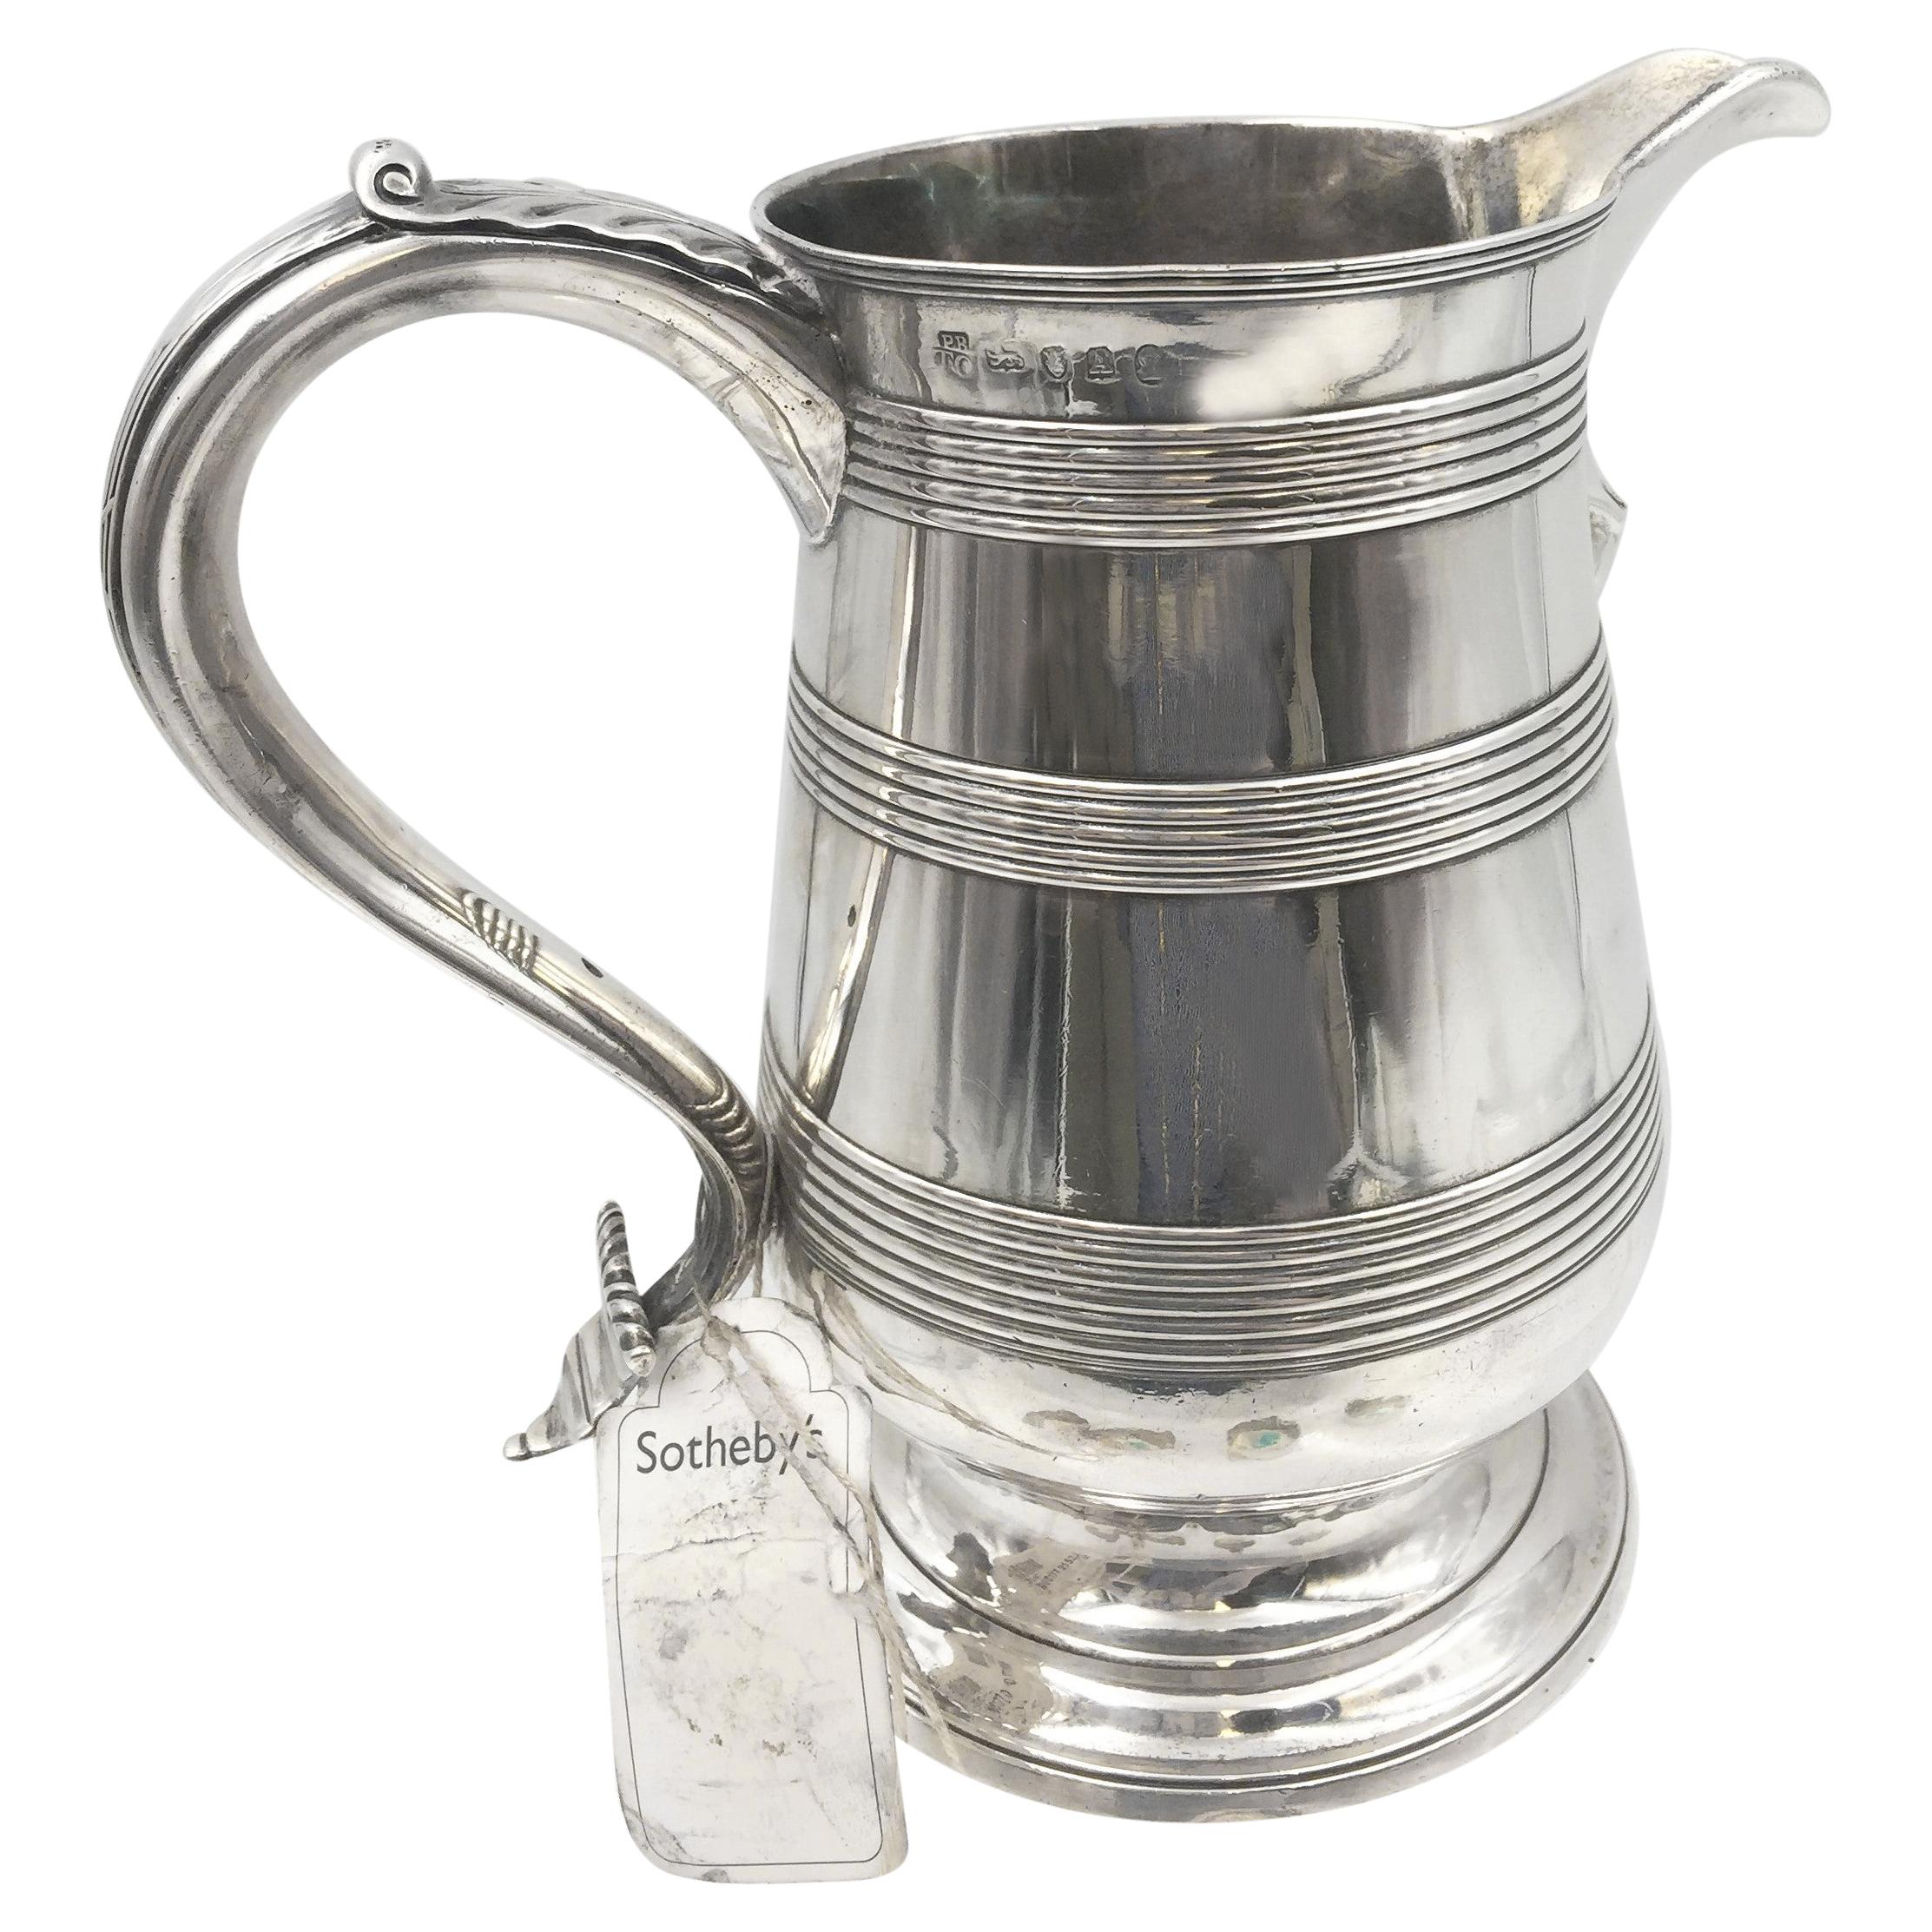 Bateman 1796 English Sterling Silver Spouted Beer Jug Pitcher Sold at Sotheby's